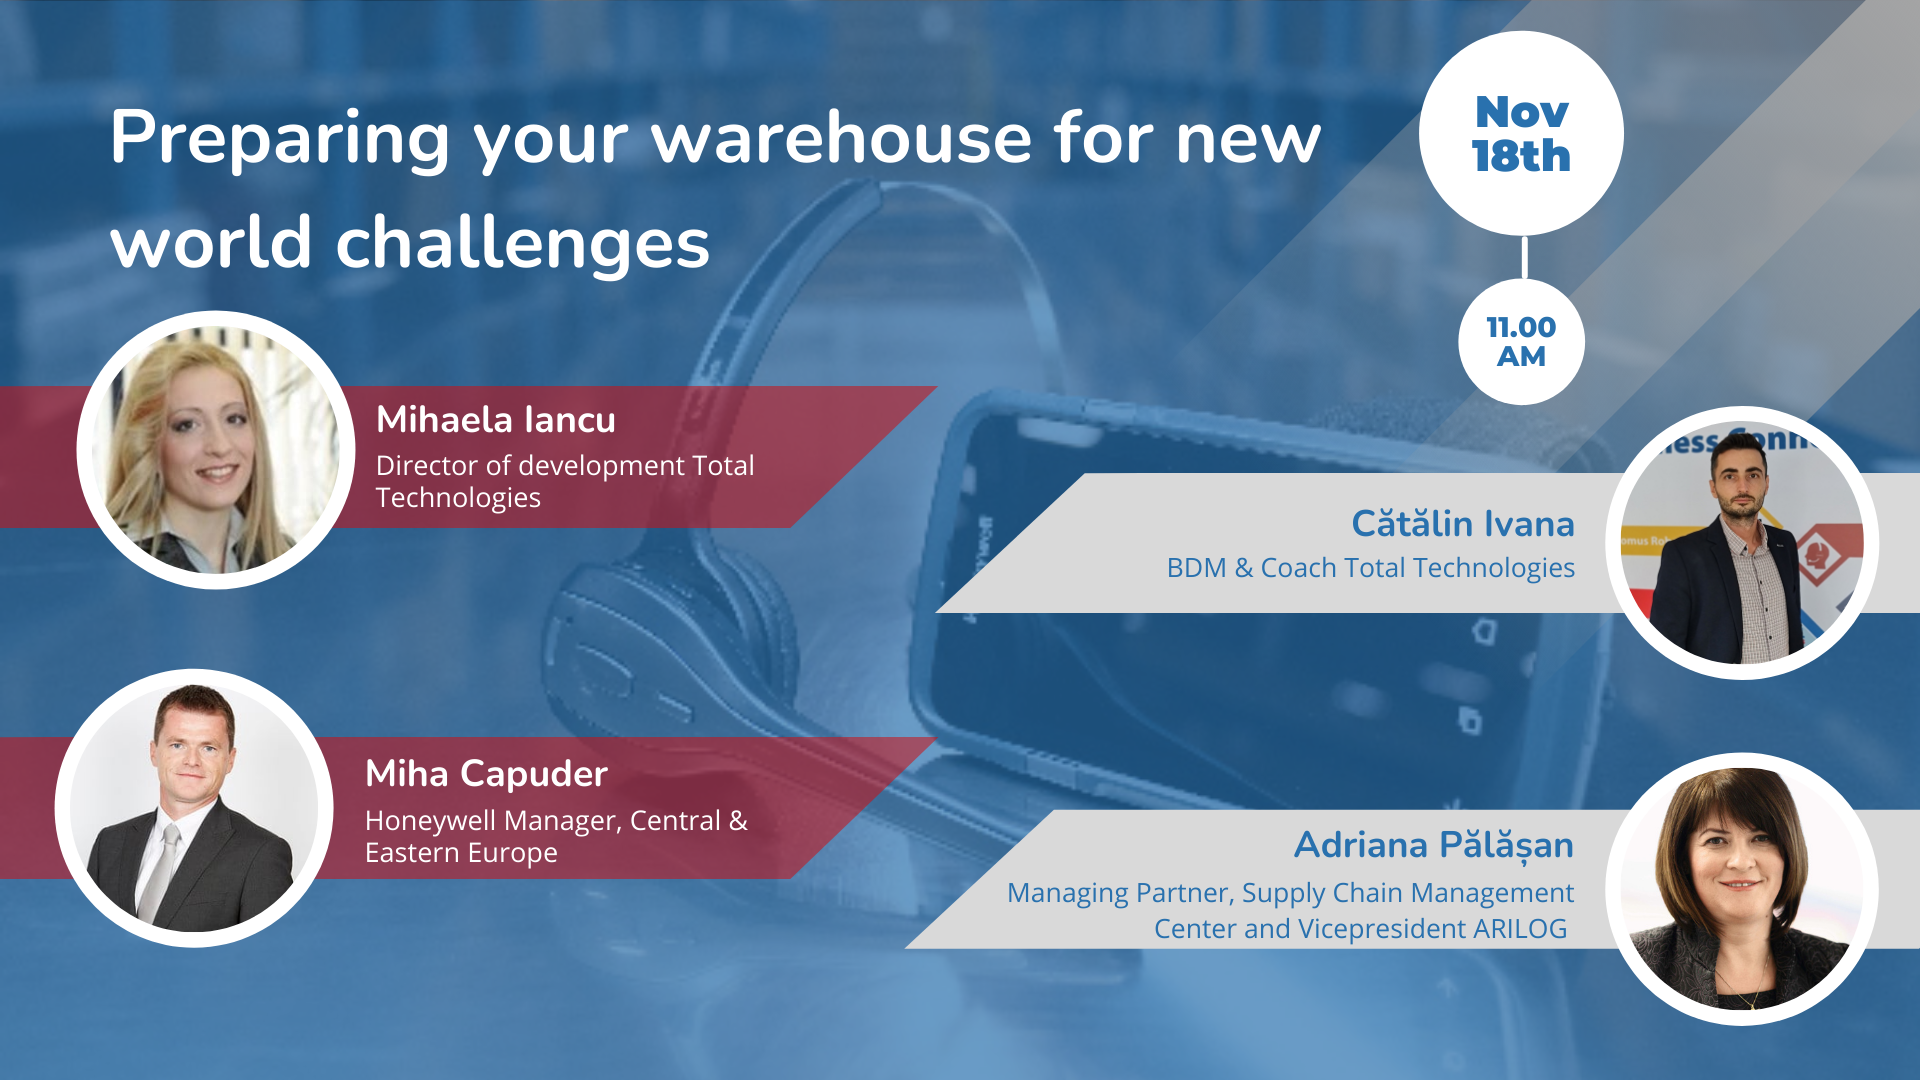 Preparing Your Warehouse for New World Challenges